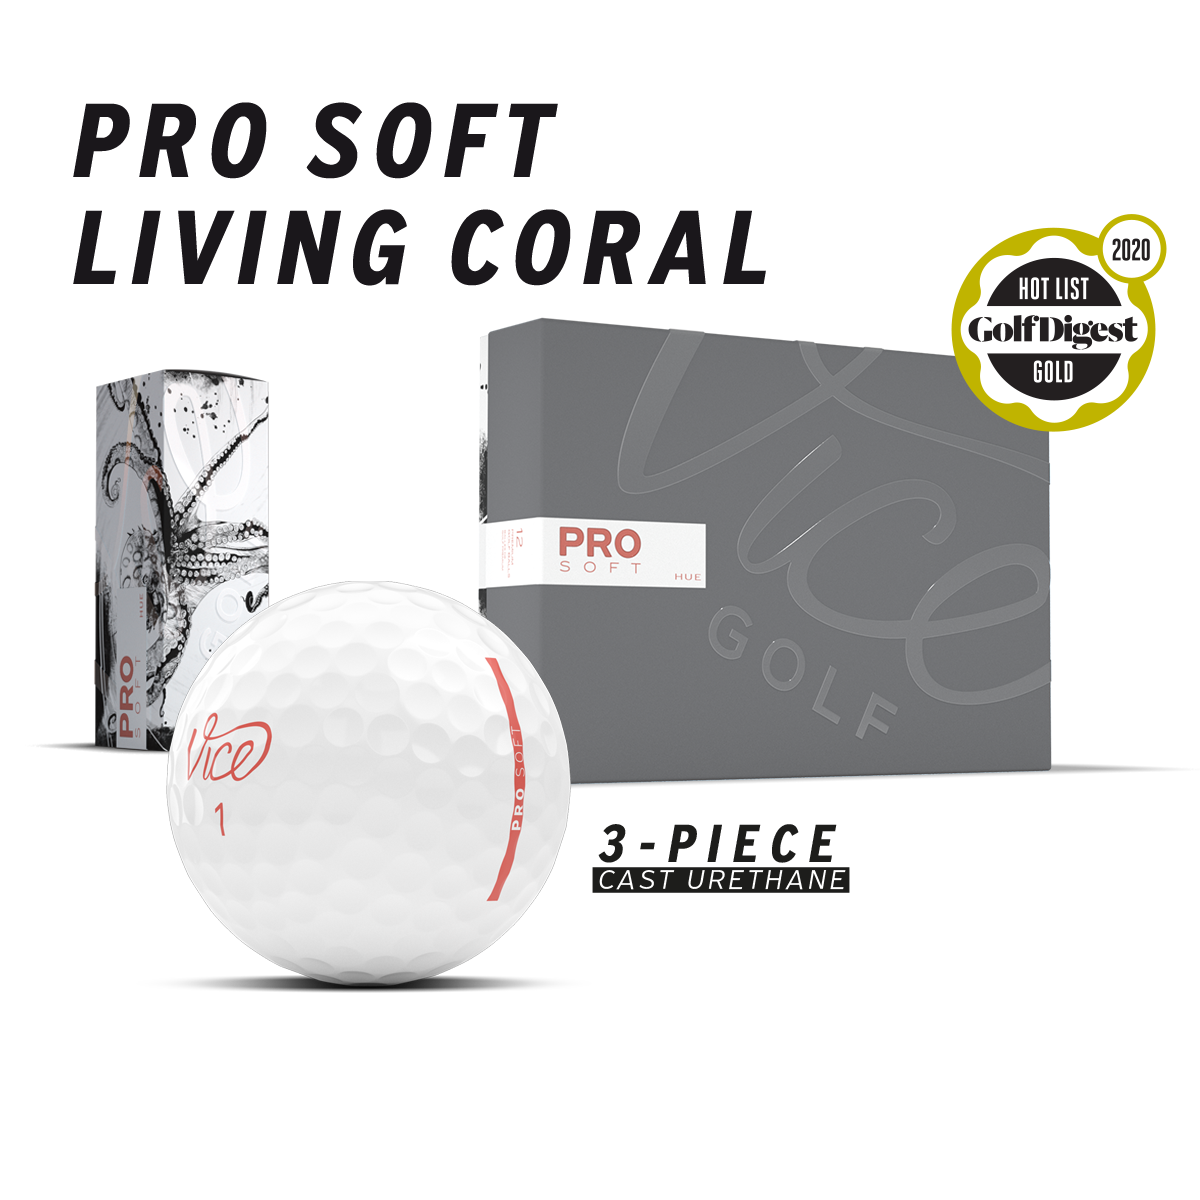 Pro Soft White package